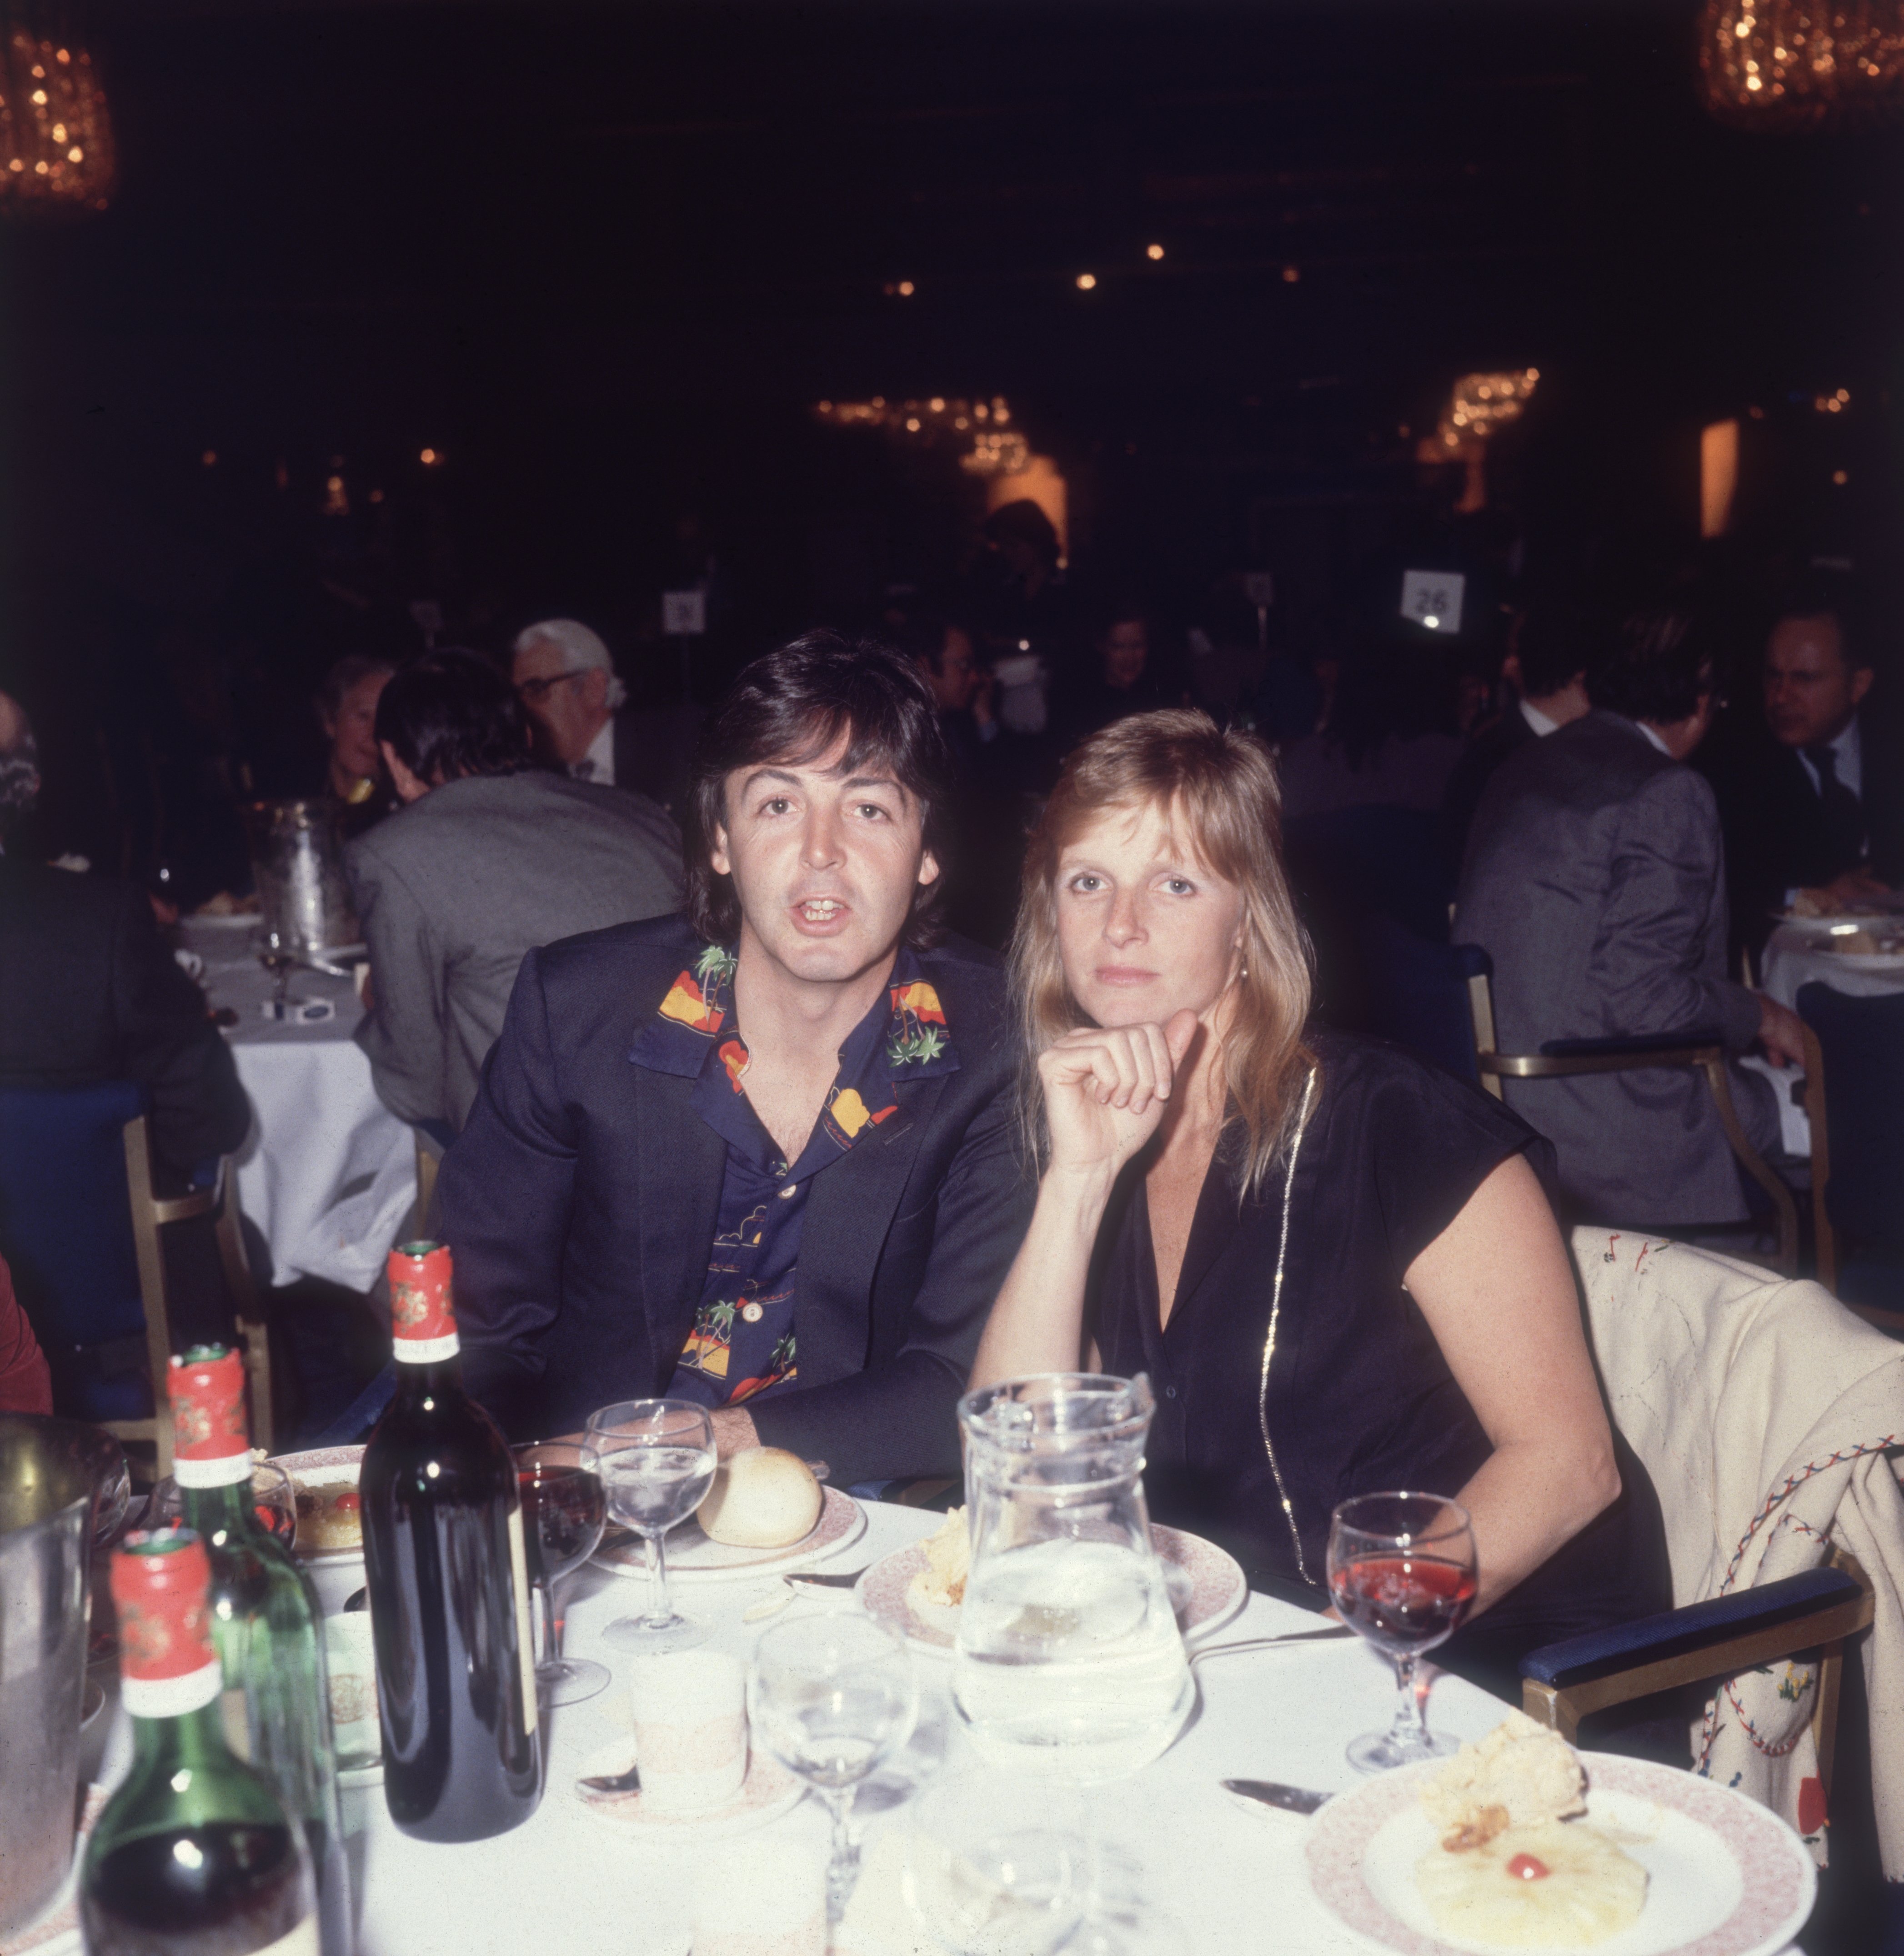 Paul McCartney and Linda McCartney at Grosvenor House Hotel, 9th May 1980 | Source: Getty Images